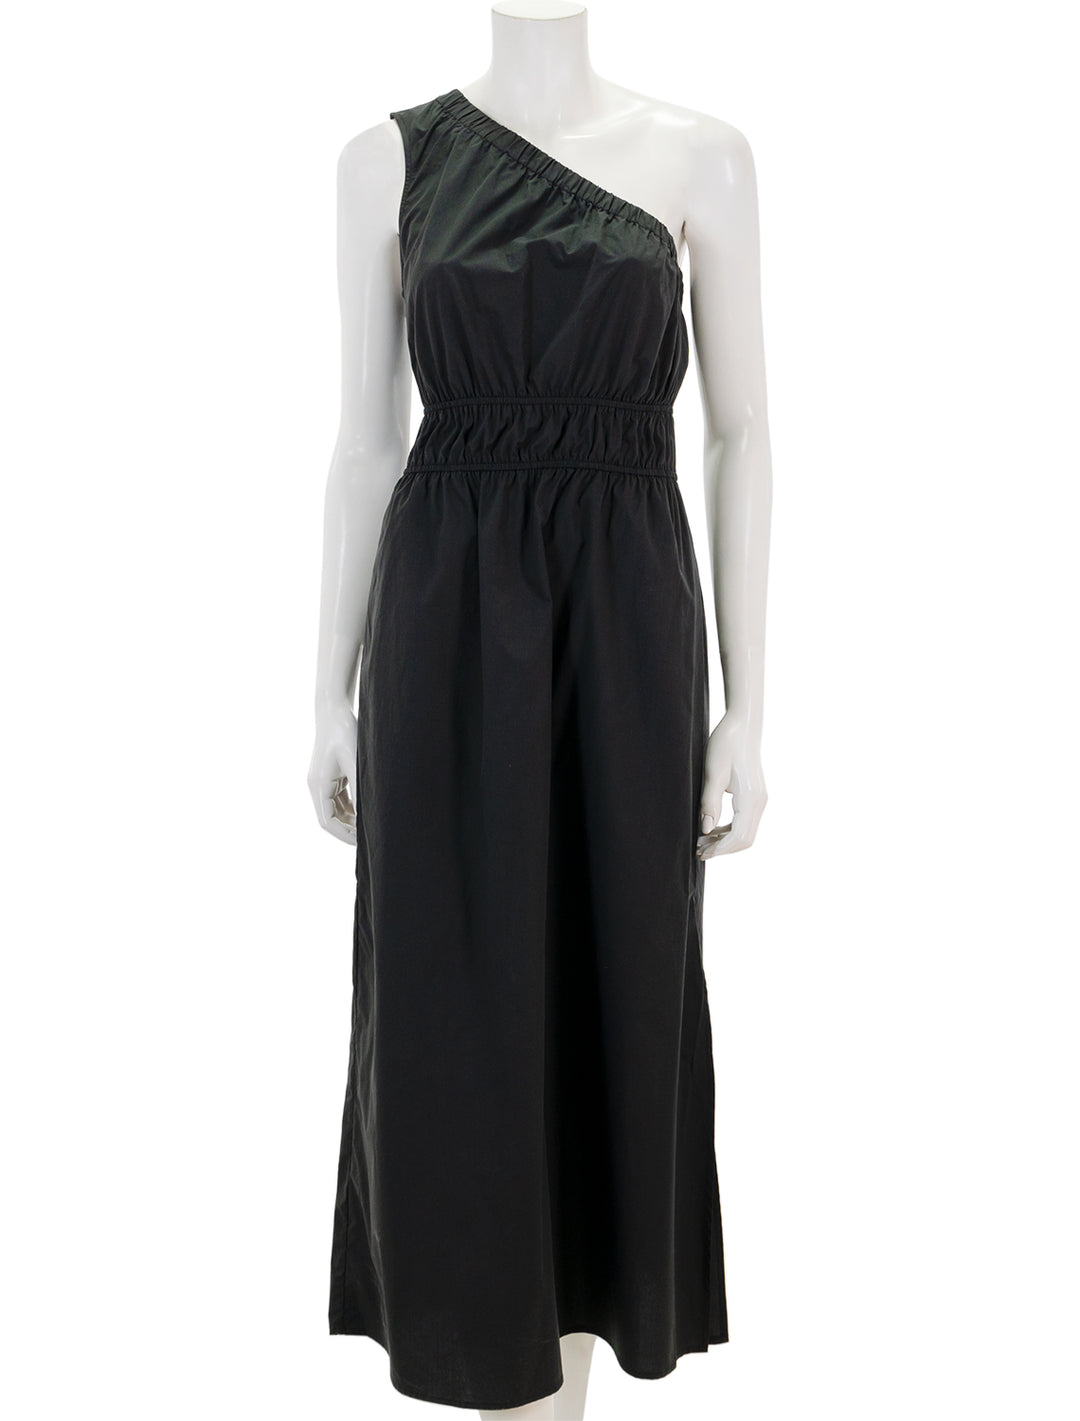 Front view of Rails' selani dress in black.